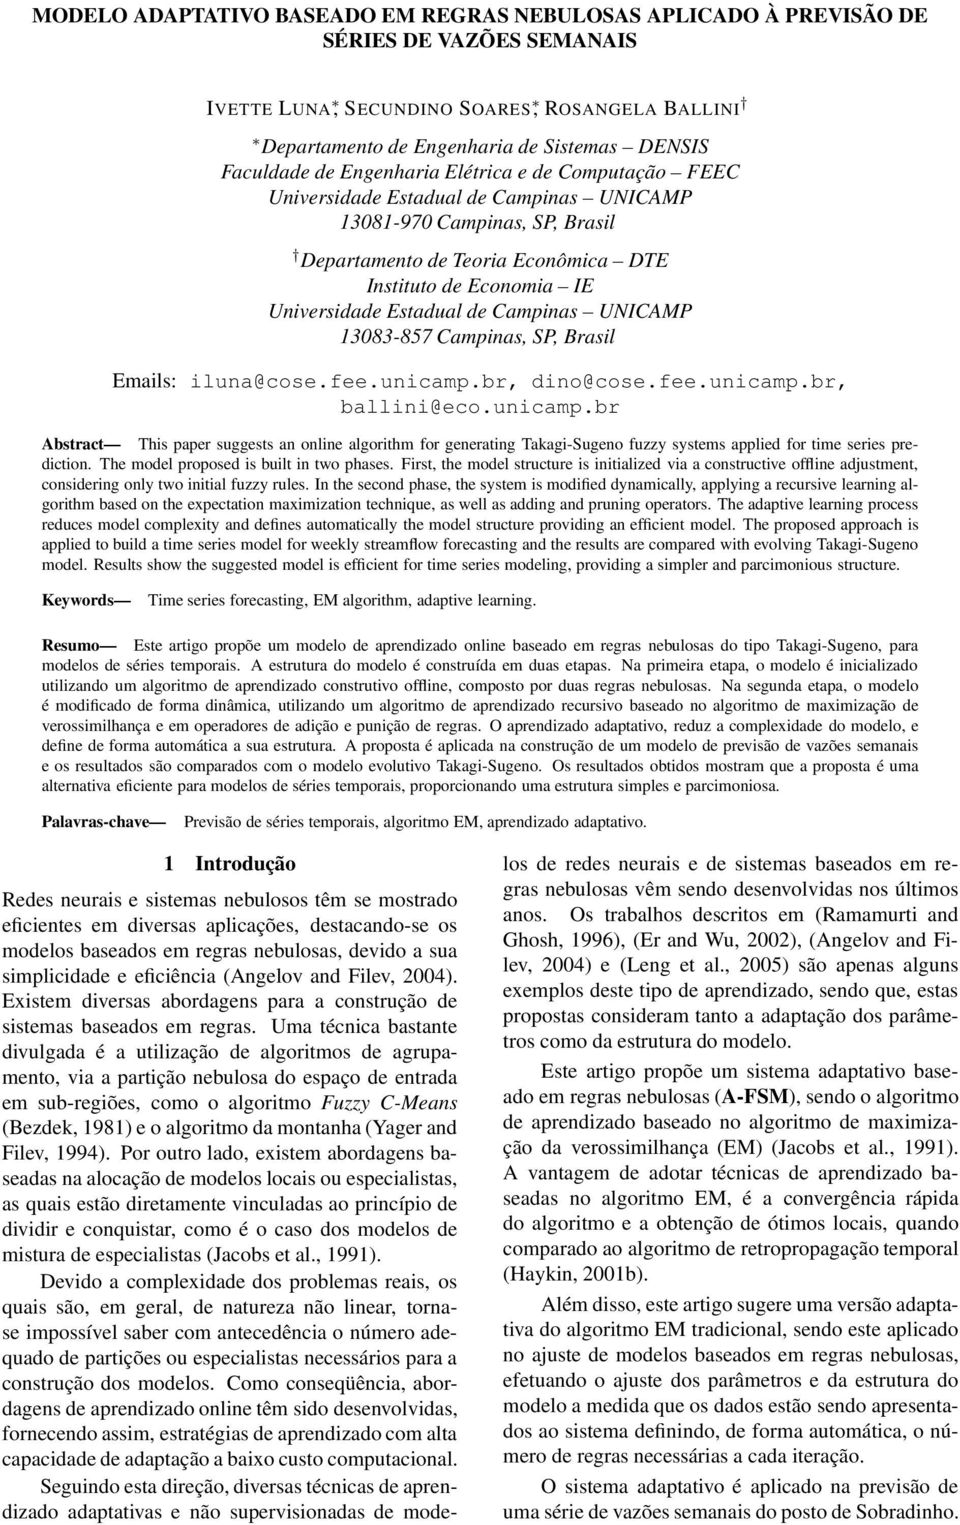 UNICAMP 1383-857 Campnas, SP, Brasl Emals: luna@cose.fee.uncamp.br, dno@cose.fee.uncamp.br, balln@eco.uncamp.br Abstract Ths paper suggests an onlne algorthm for generatng Takag-Sugeno fuzzy systems appled for tme seres predcton.